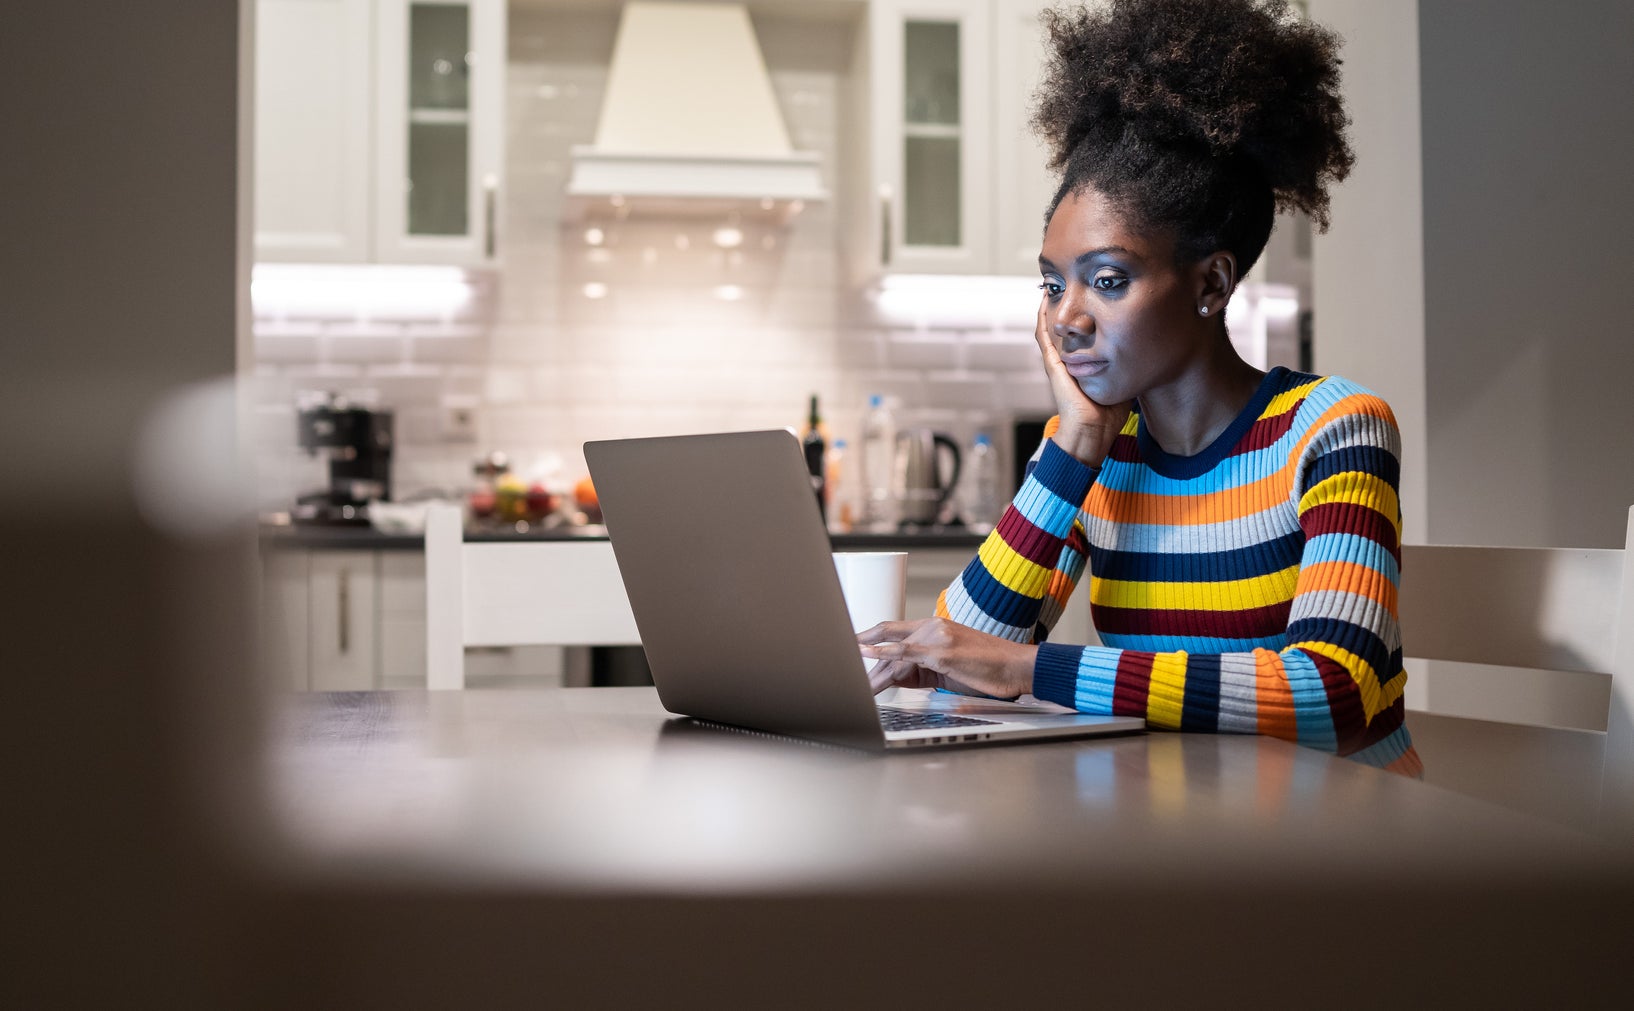 Woman in striped top works on laptop in a home kitchen, focused on screen